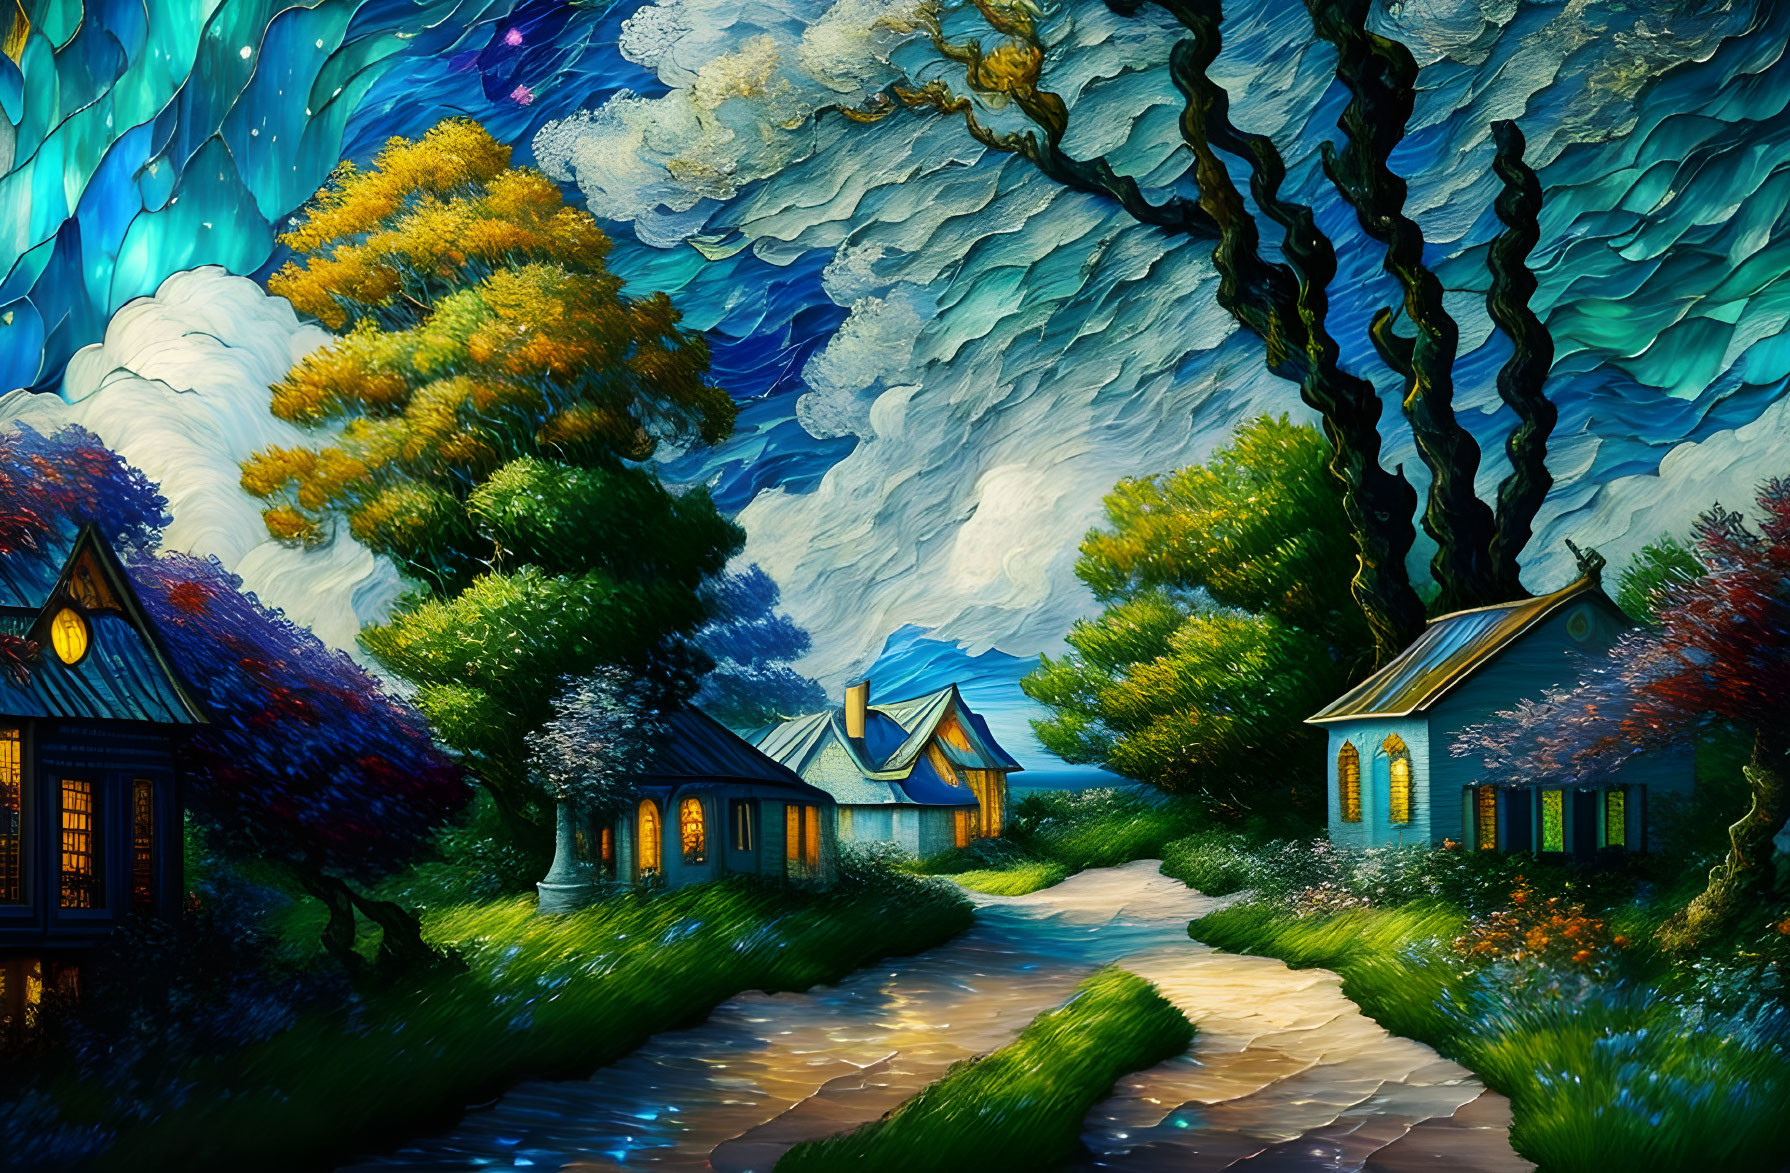 Colorful painting of whimsical village with glowing cottages, winding path, and stylized sky.